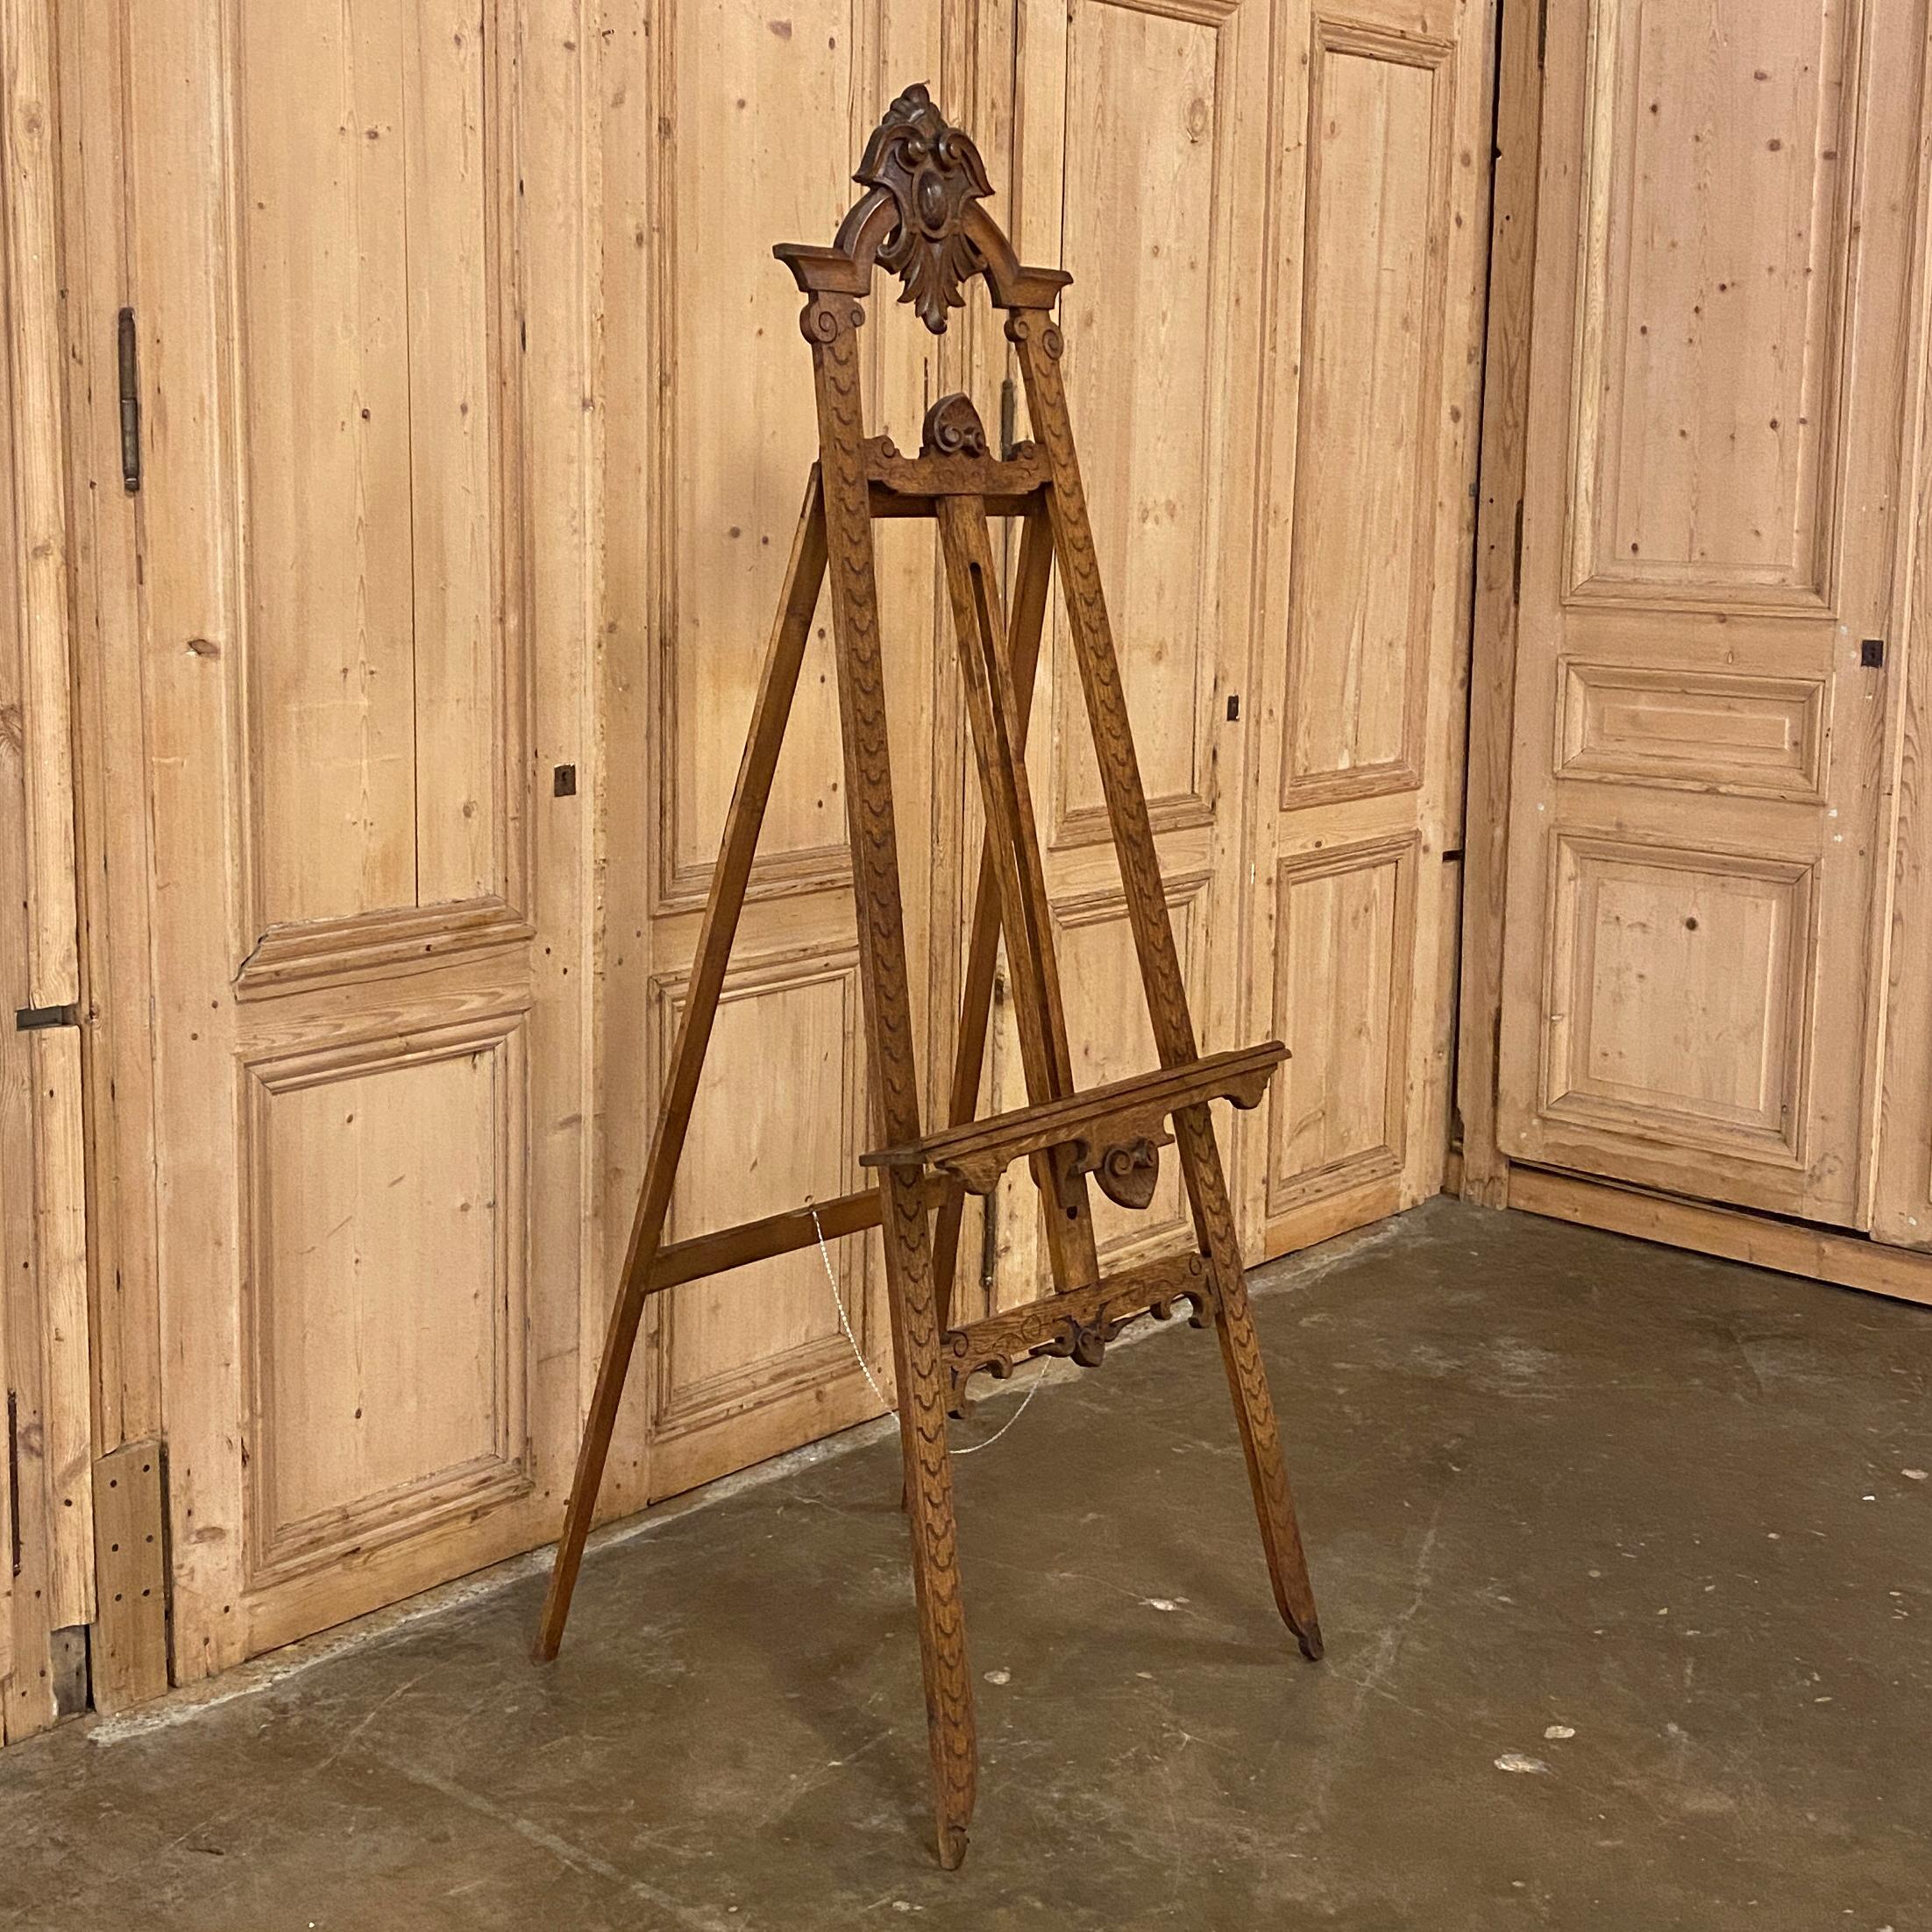 19th century French Napoleon III decorative display easel is an exceptional way to display a work of art without having to hang it on a wall. Crafted from solid oak, such easels are great for open floor plans with lots of windows. The decorative